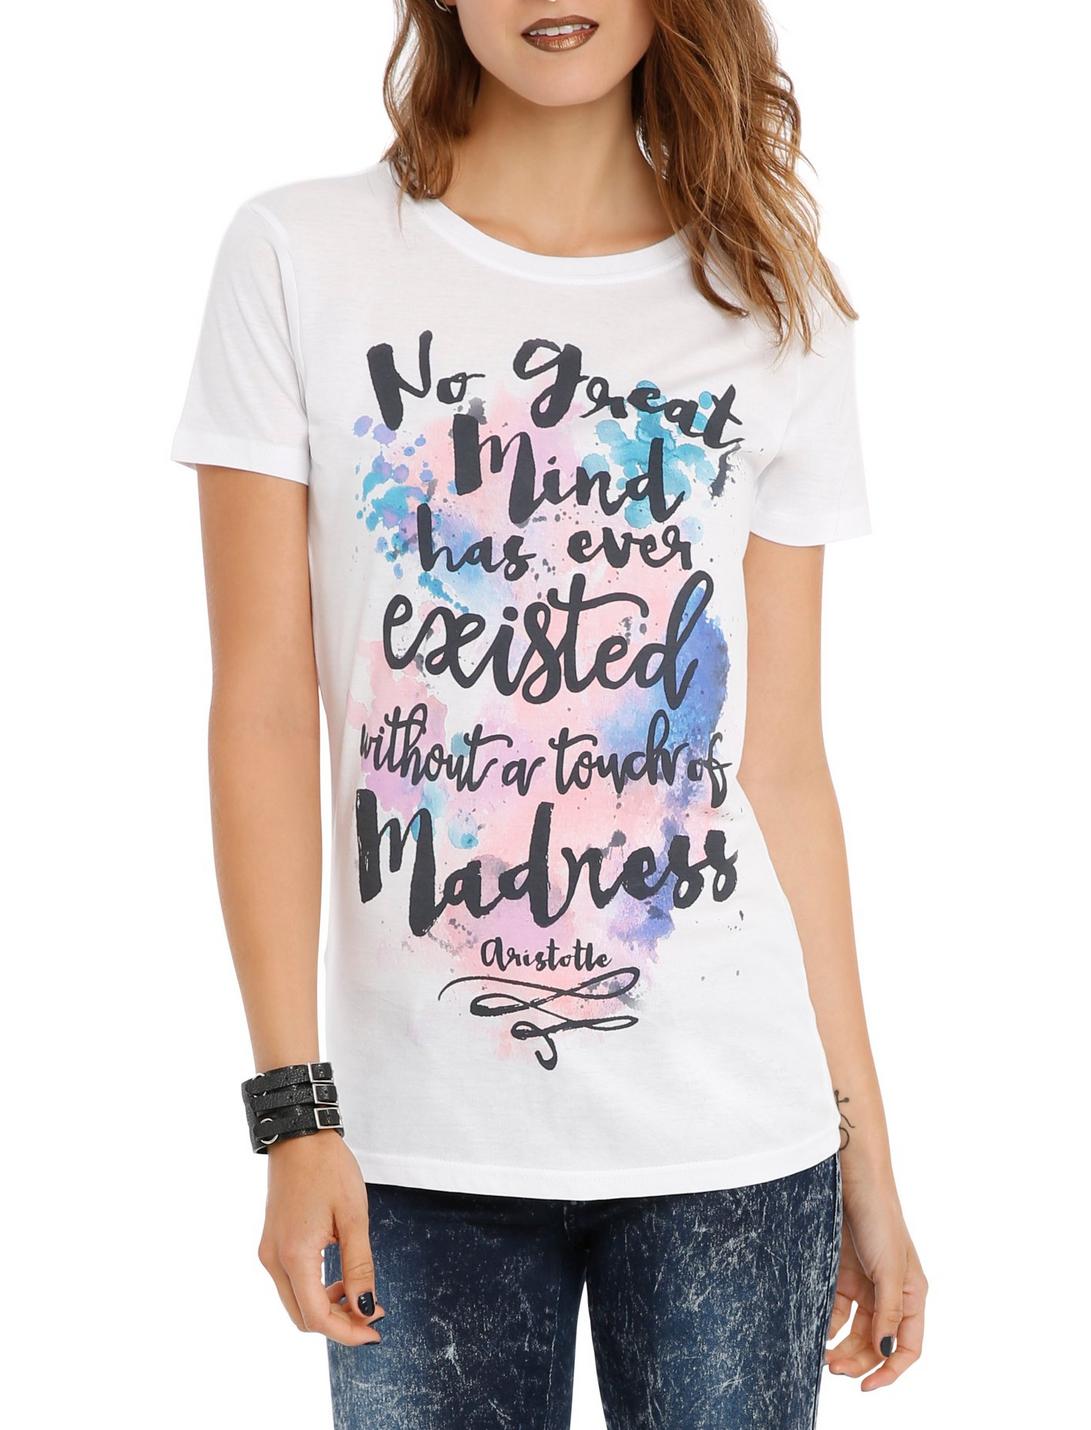 Touch Of Madness Girls T-Shirt, BLACK, hi-res